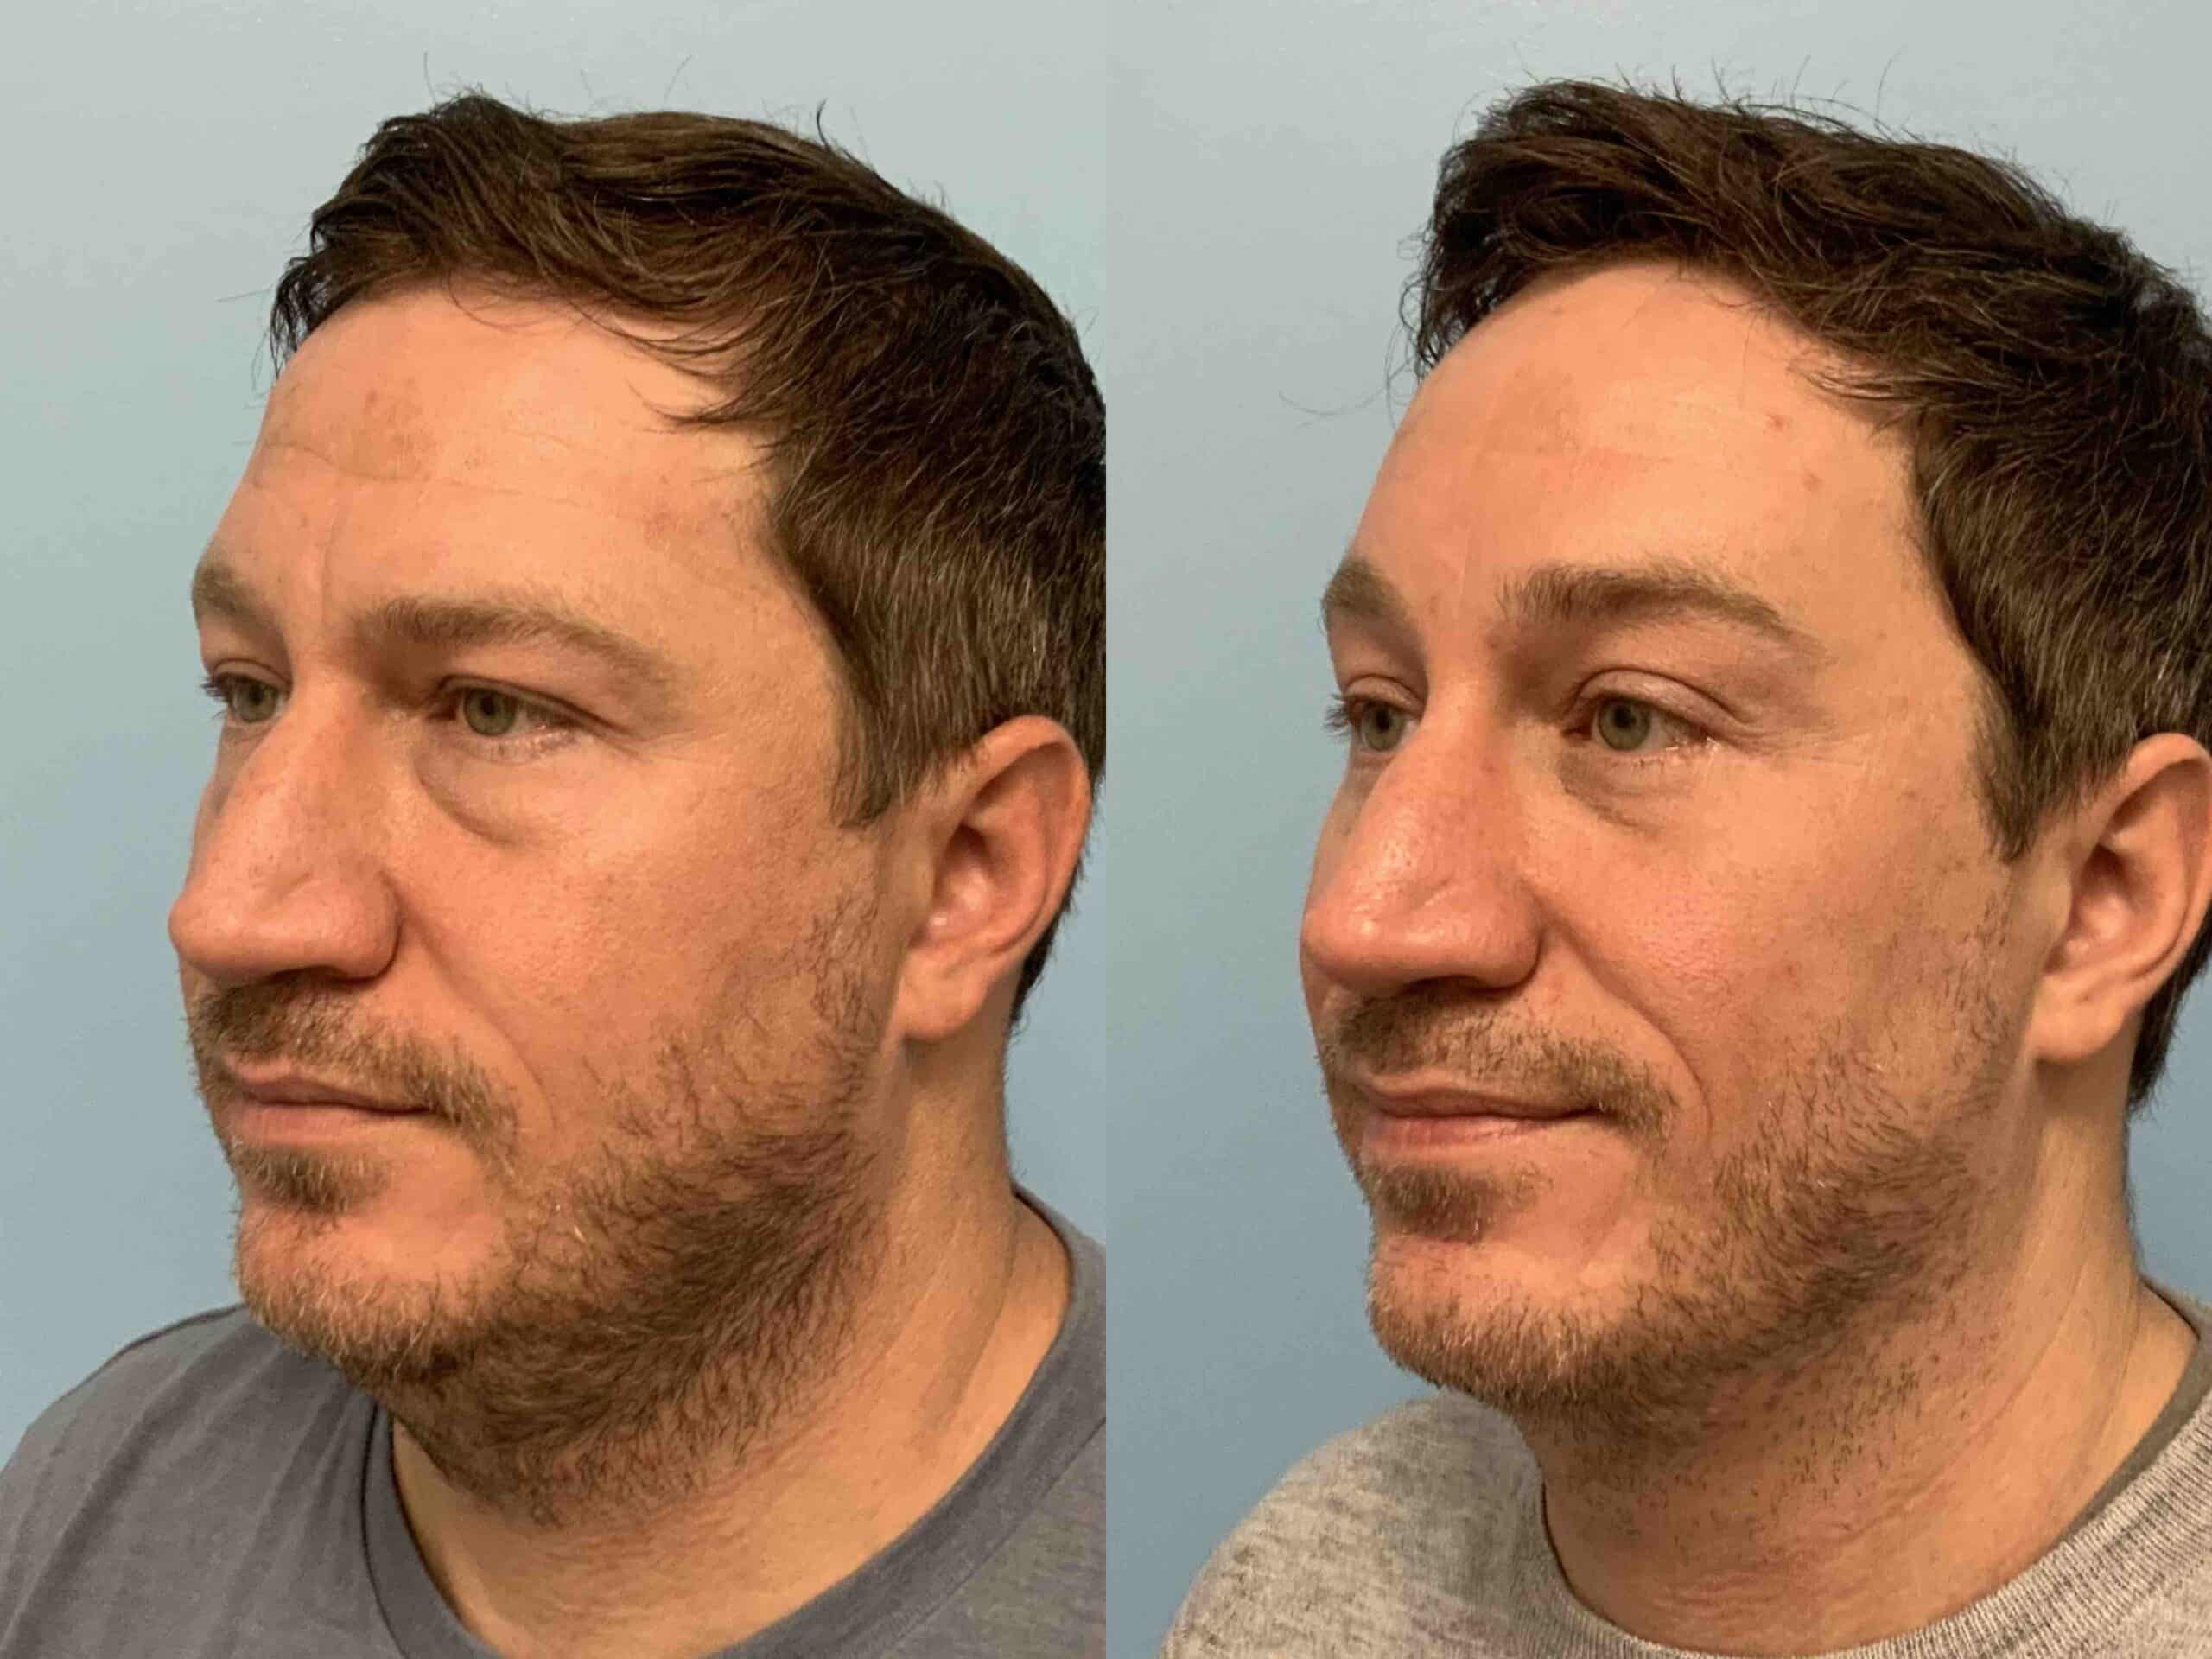 Before and after, 10 mo post op from Lower Blepharoplasty, Canthopexy, Endo Brow lift performed by Dr. Paul Vanek (diagonal view)